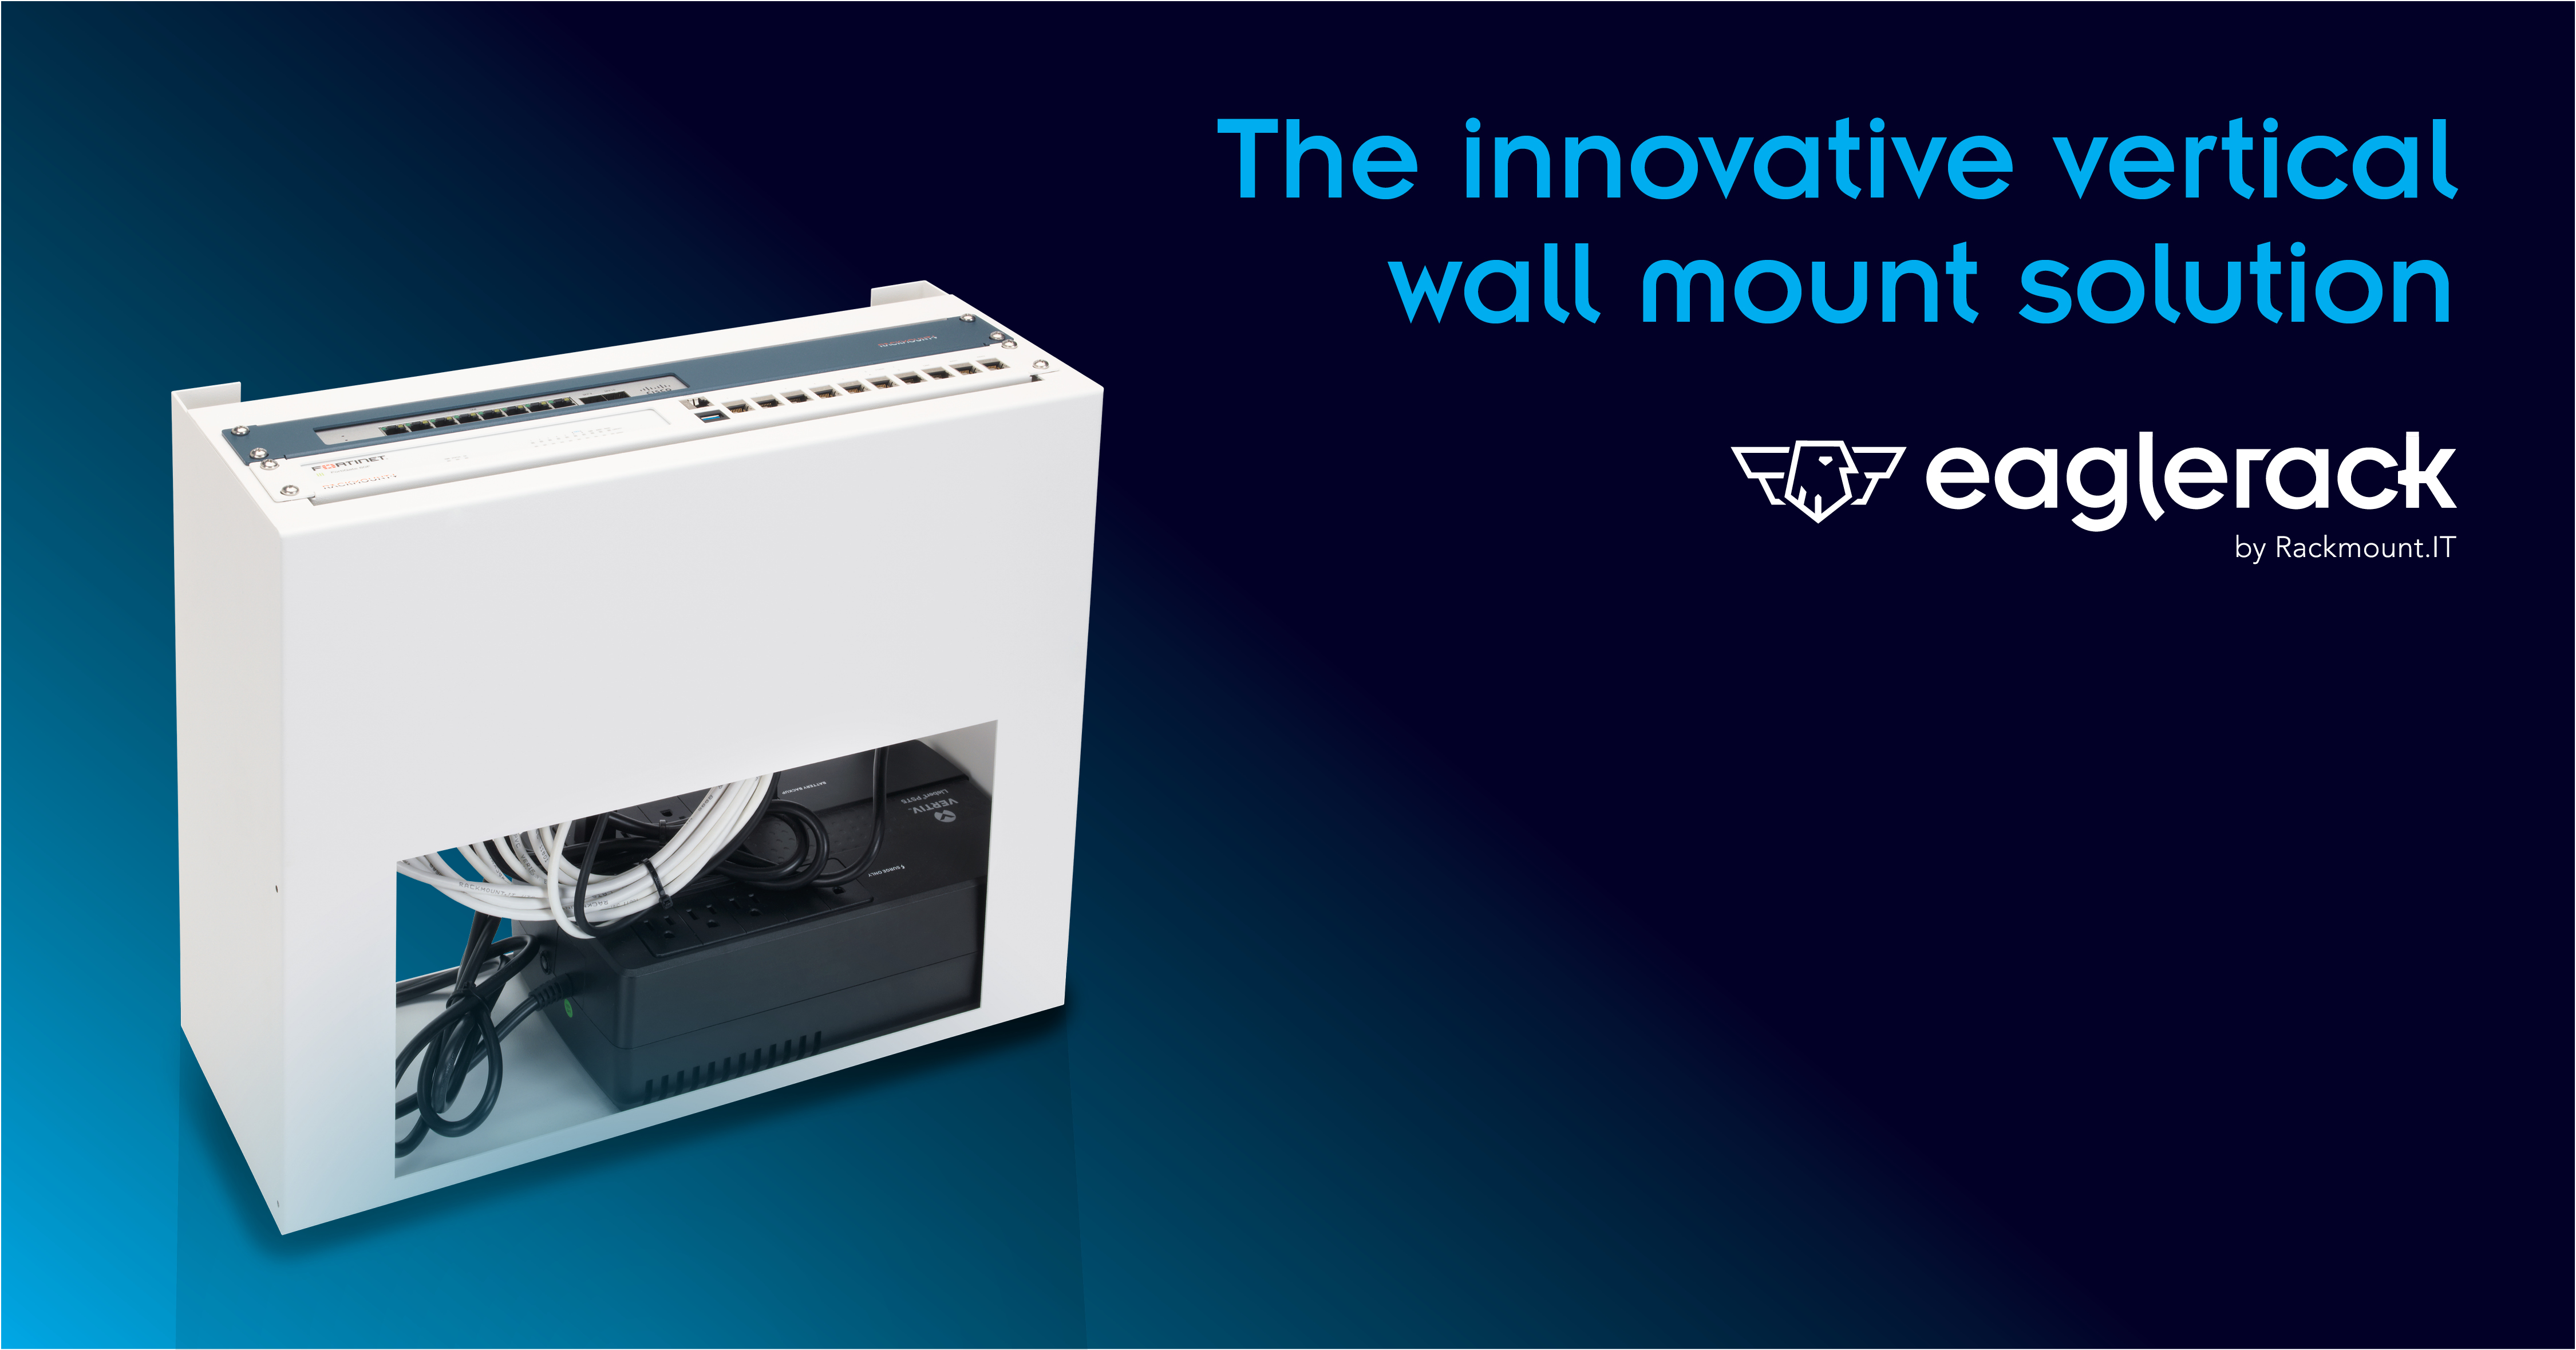 Eaglerack - The innovative vertical wall mount solution